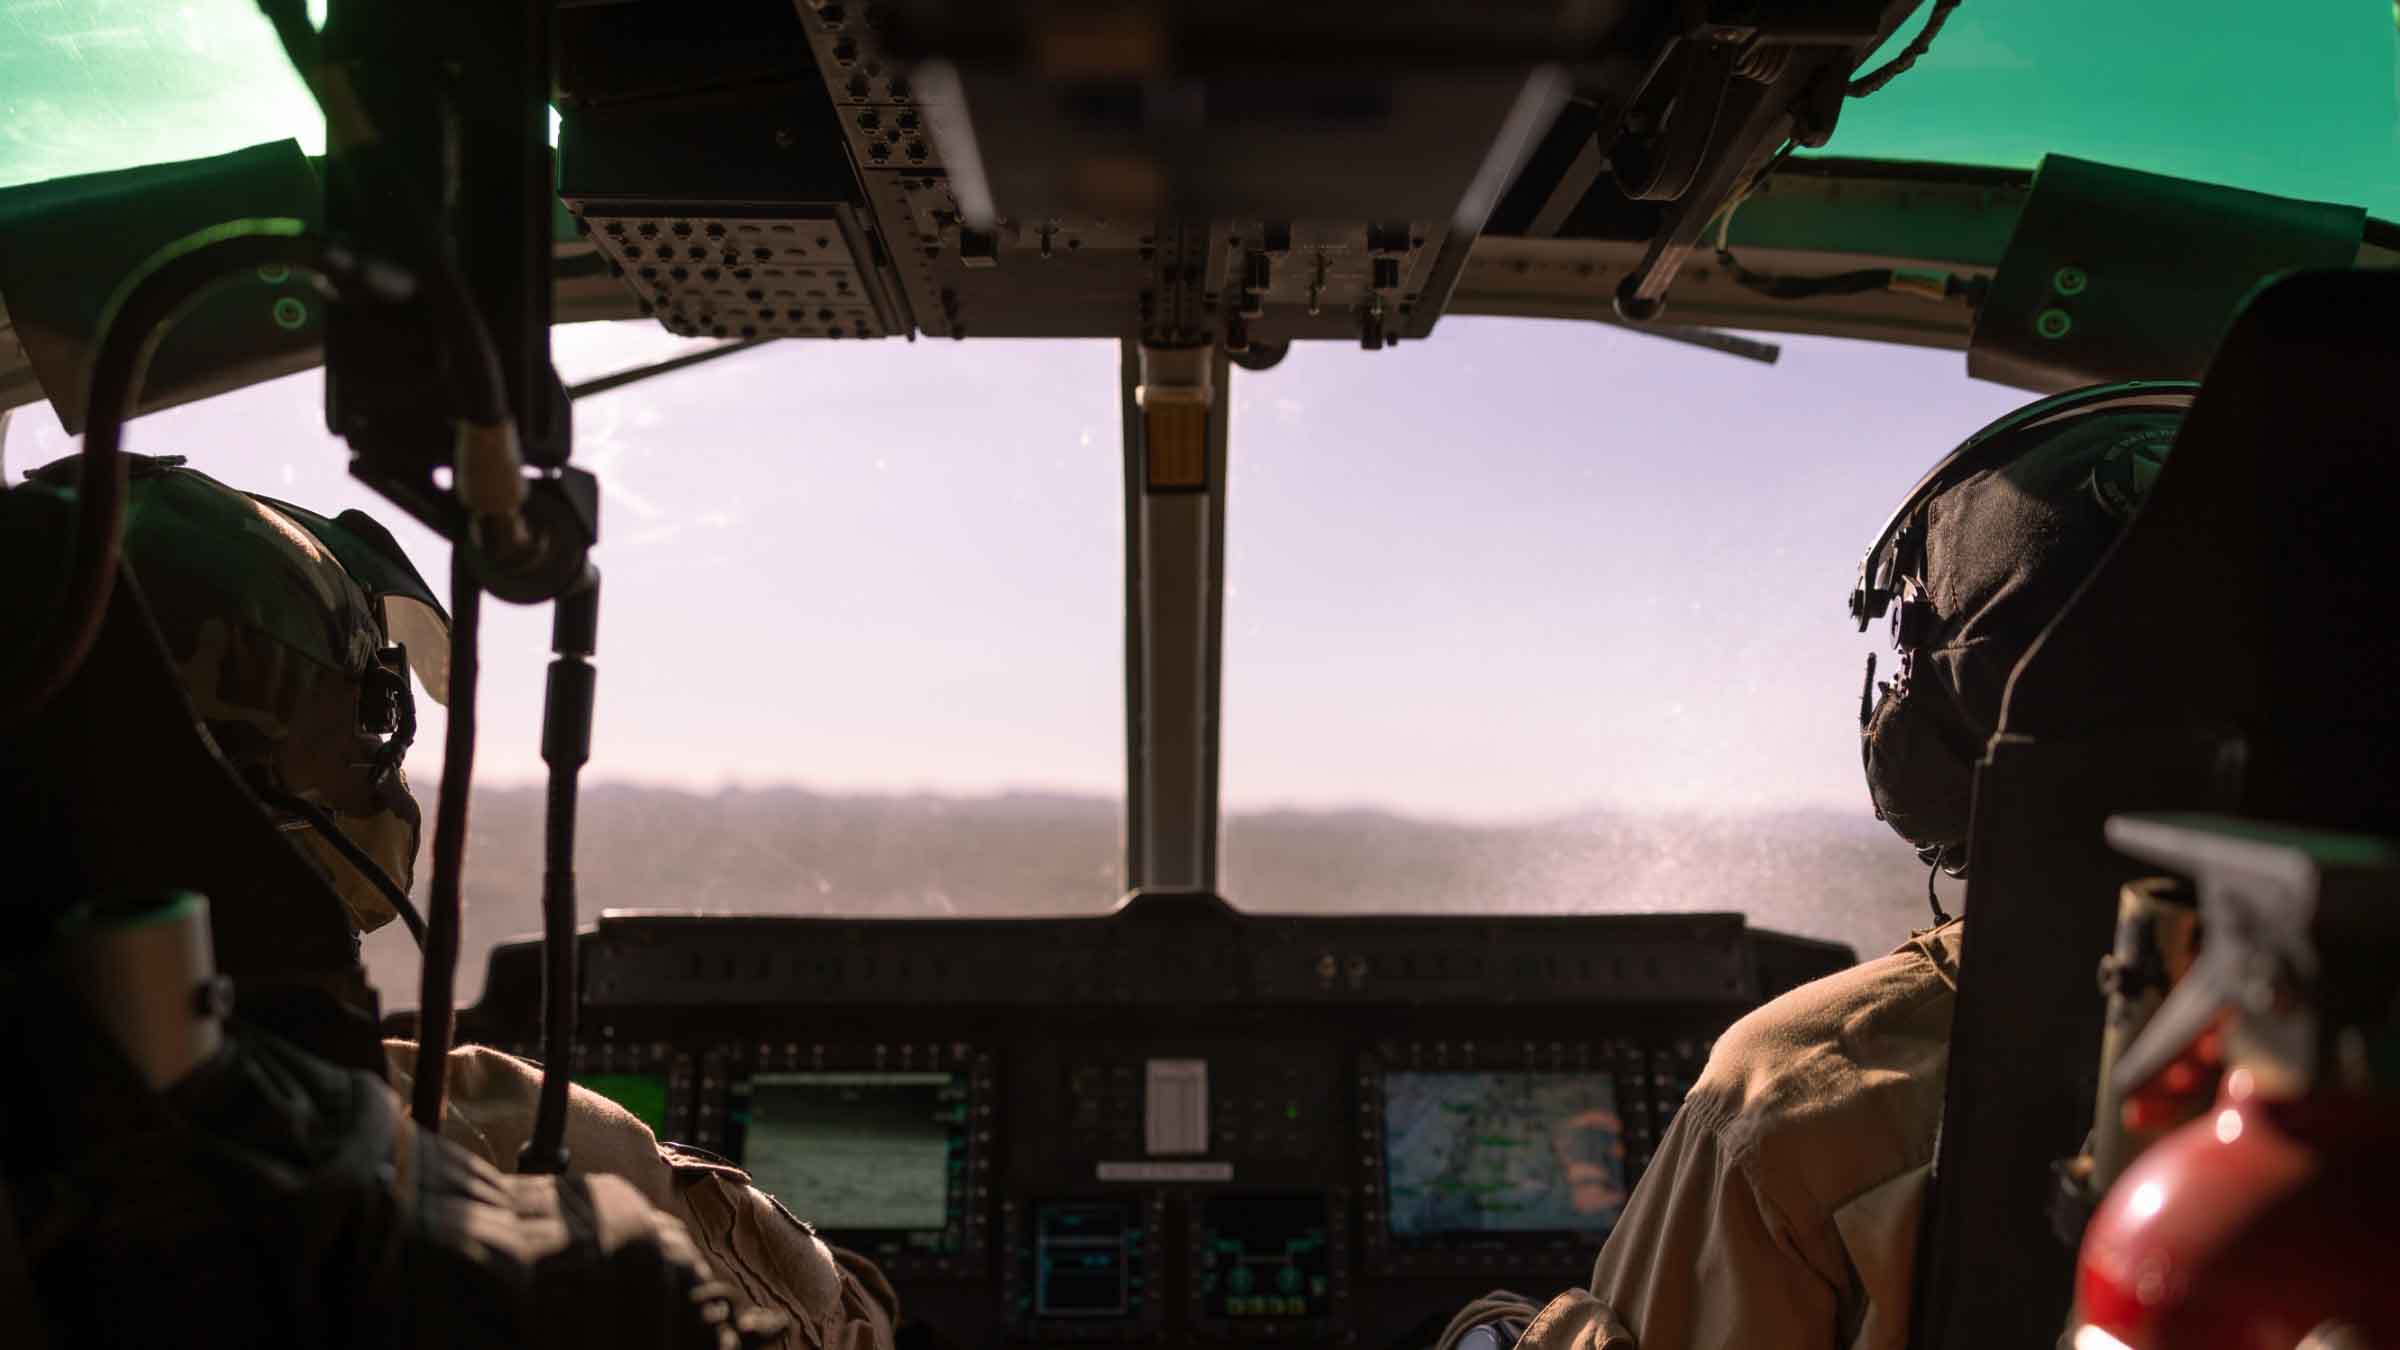 Two pilots in the cockpit of an aircraft, demonstrating By Light's simulation and training capabilities.